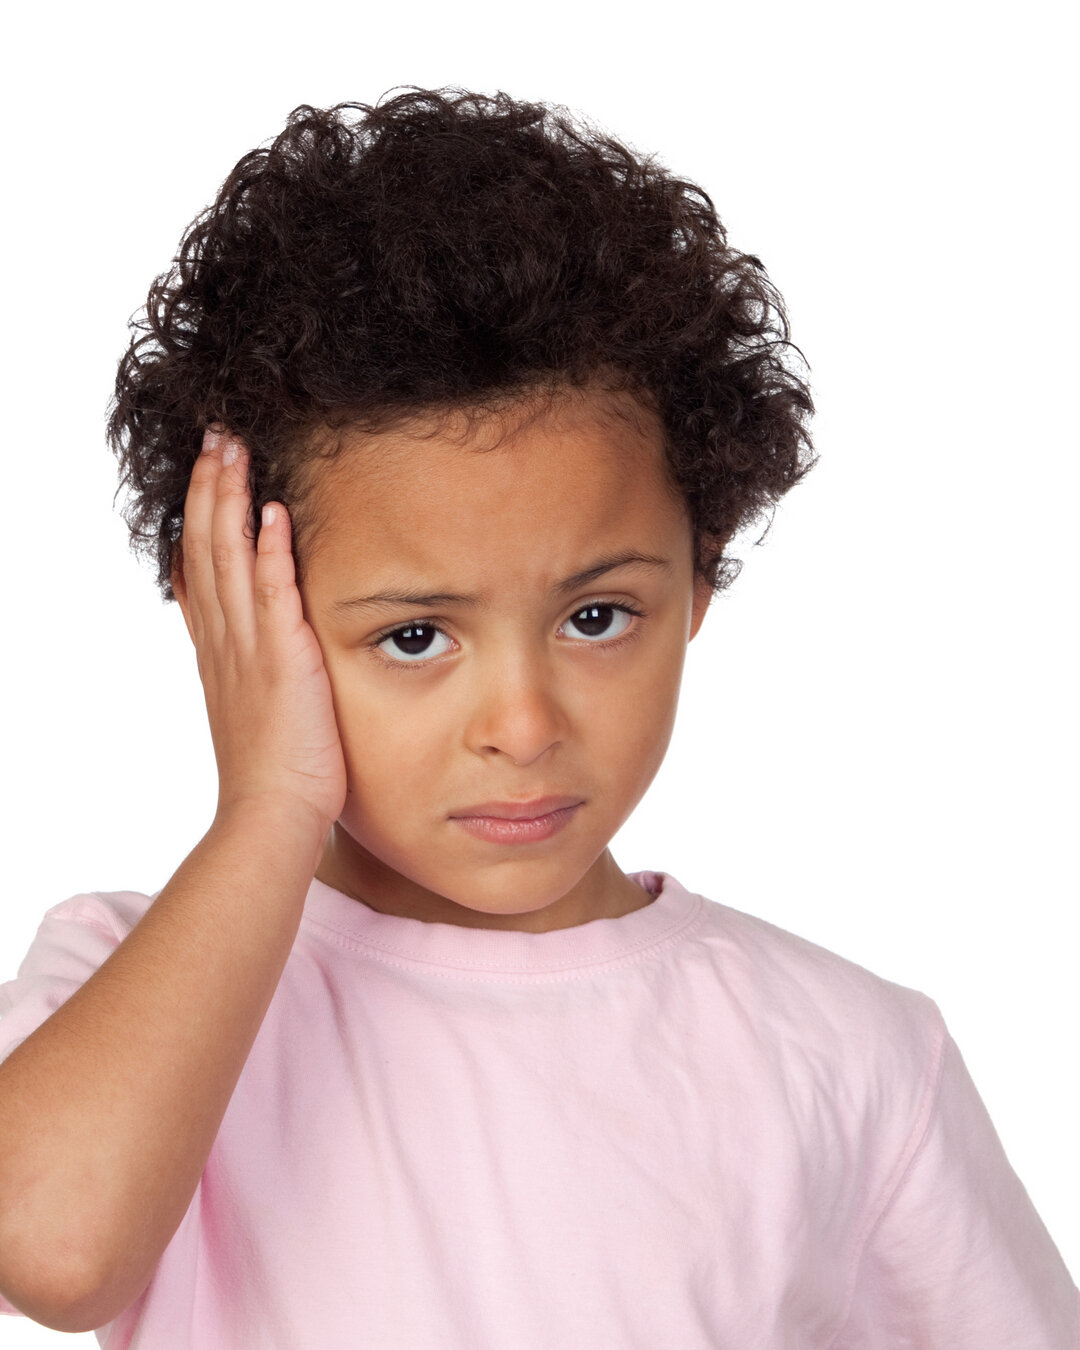 The next most common question I get from parents is &quot;How do I know if it is a migraine or another type of headache?&quot; and you are right to ask this question, migraine is one of many types of headaches that children have to live with. Diagnos